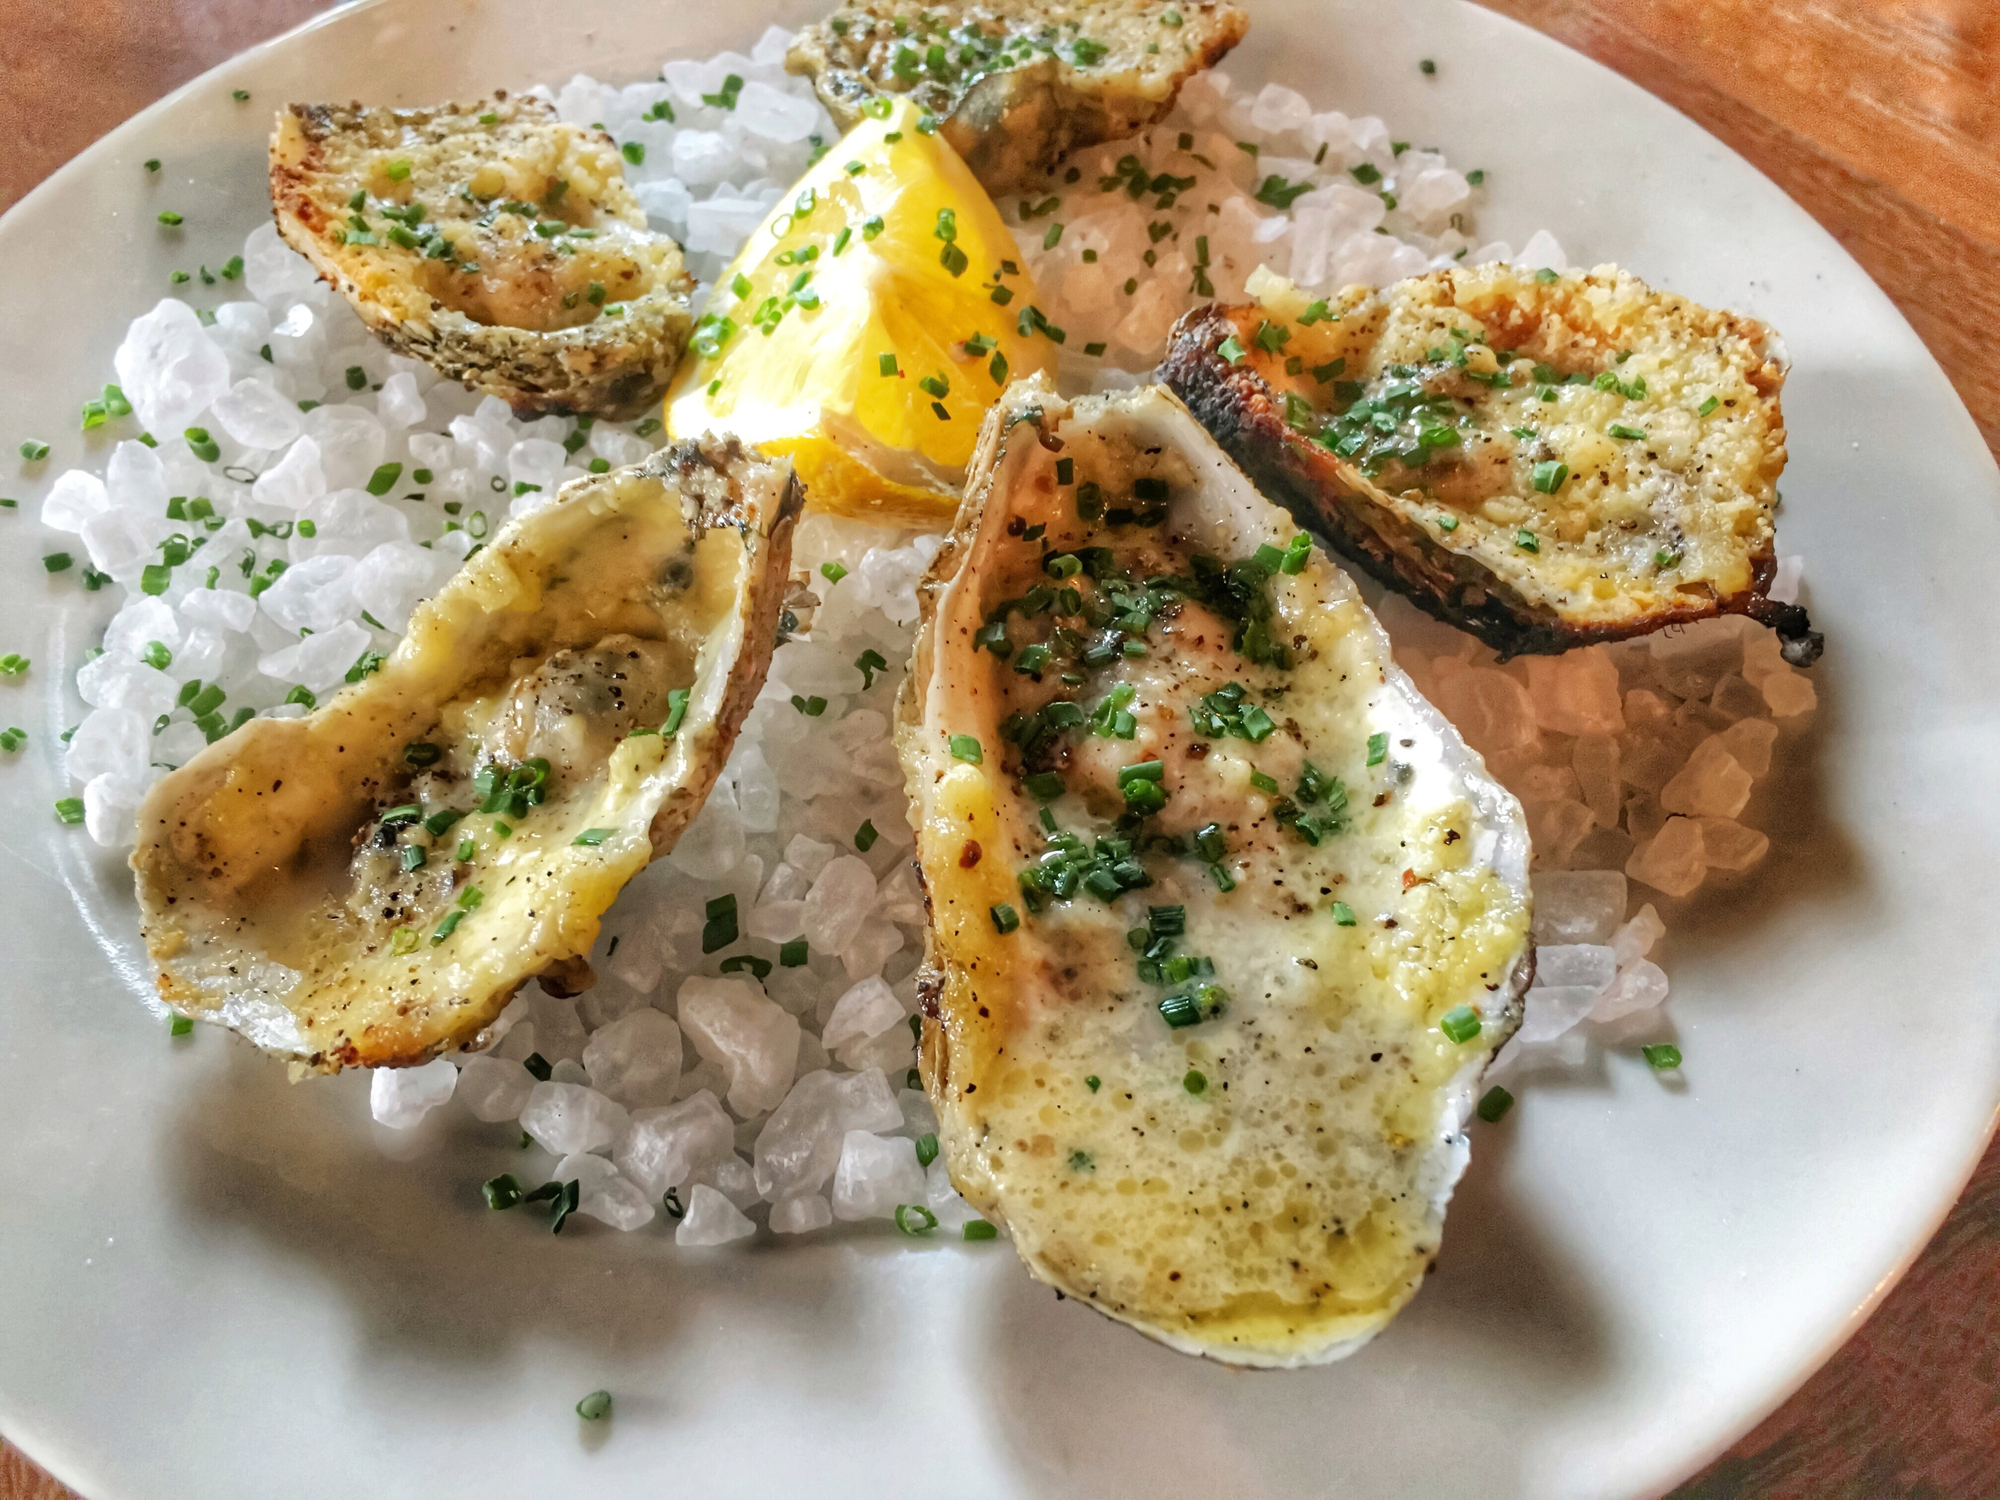 Grilled oysters on a bed of rock salt with lemon wedge and parsley on a plate